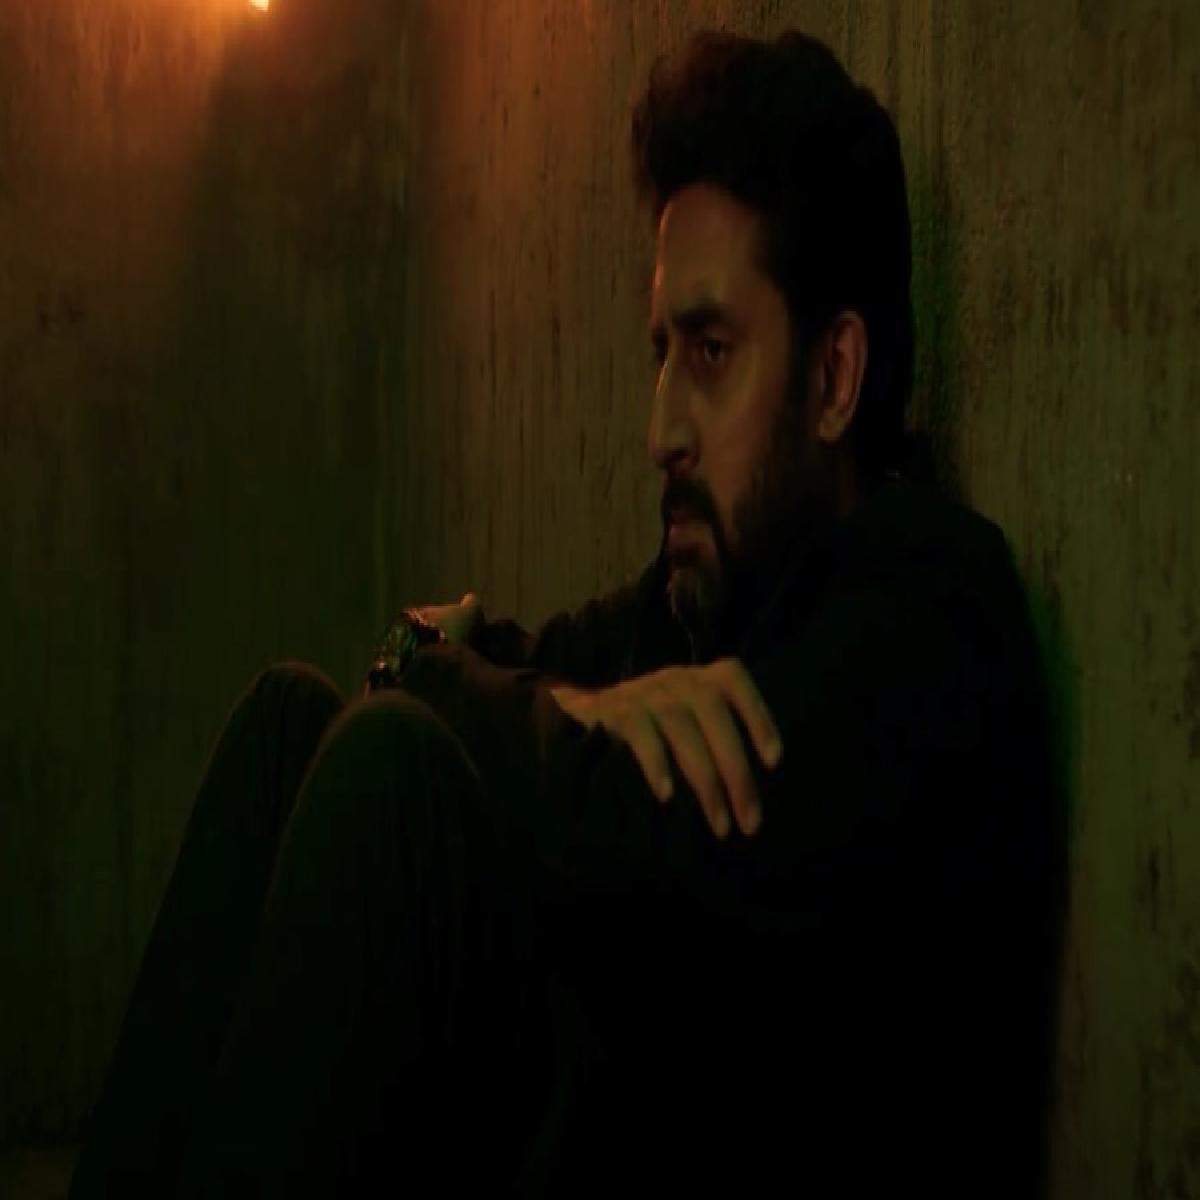 Abhishek Bachchan As Avinash Sabharwal Is Back In Action, Breathe Into The Shadows Season 2 Trailer Is Out